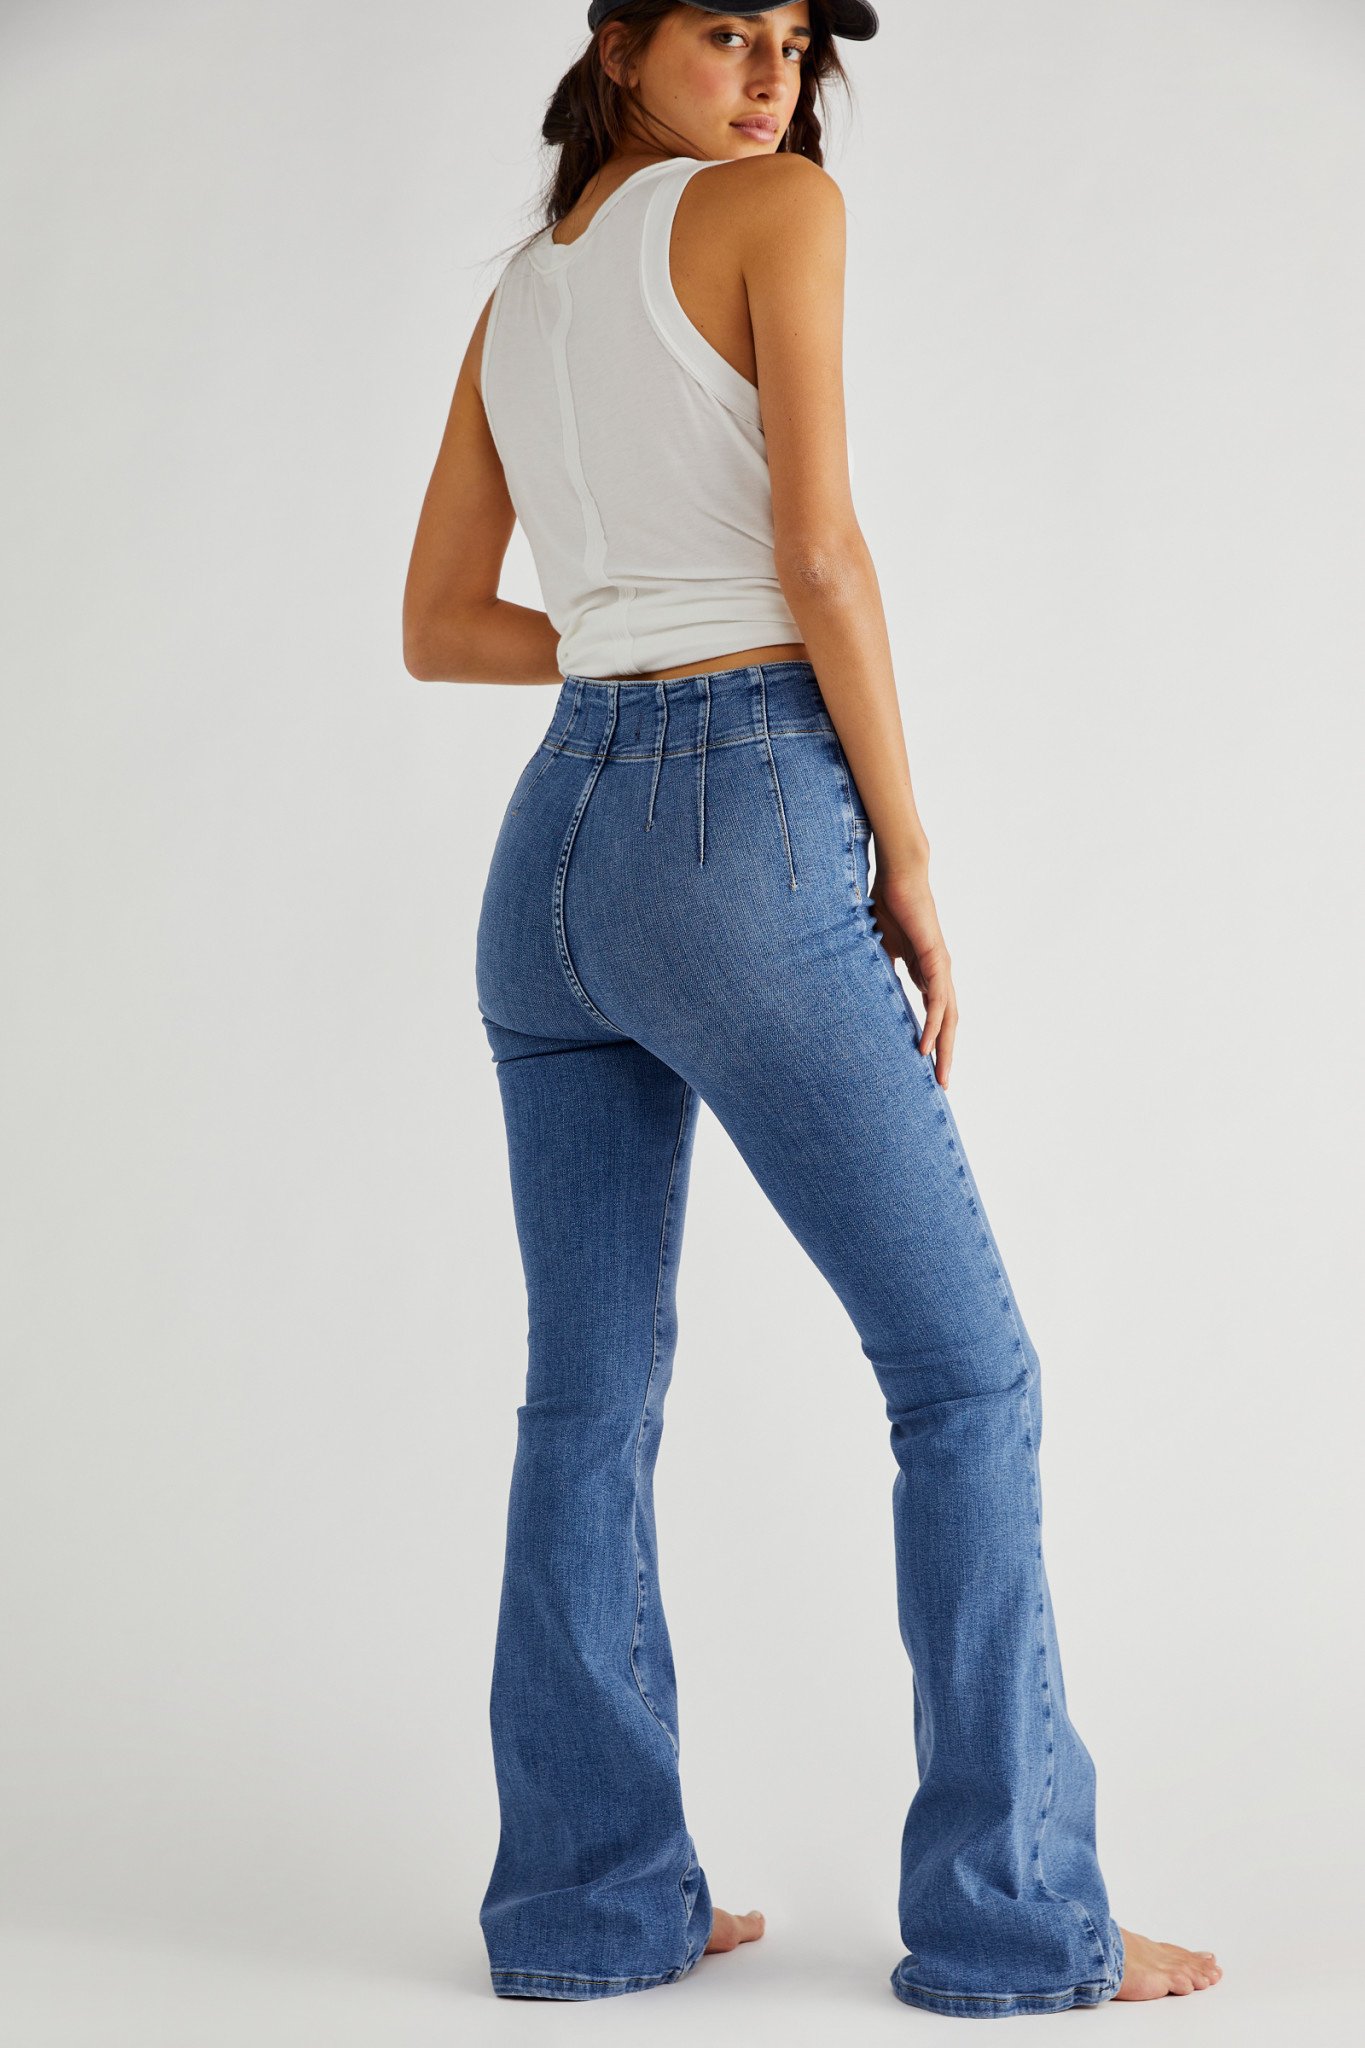 Free People Jayde Flare Jeans - seensociety.com